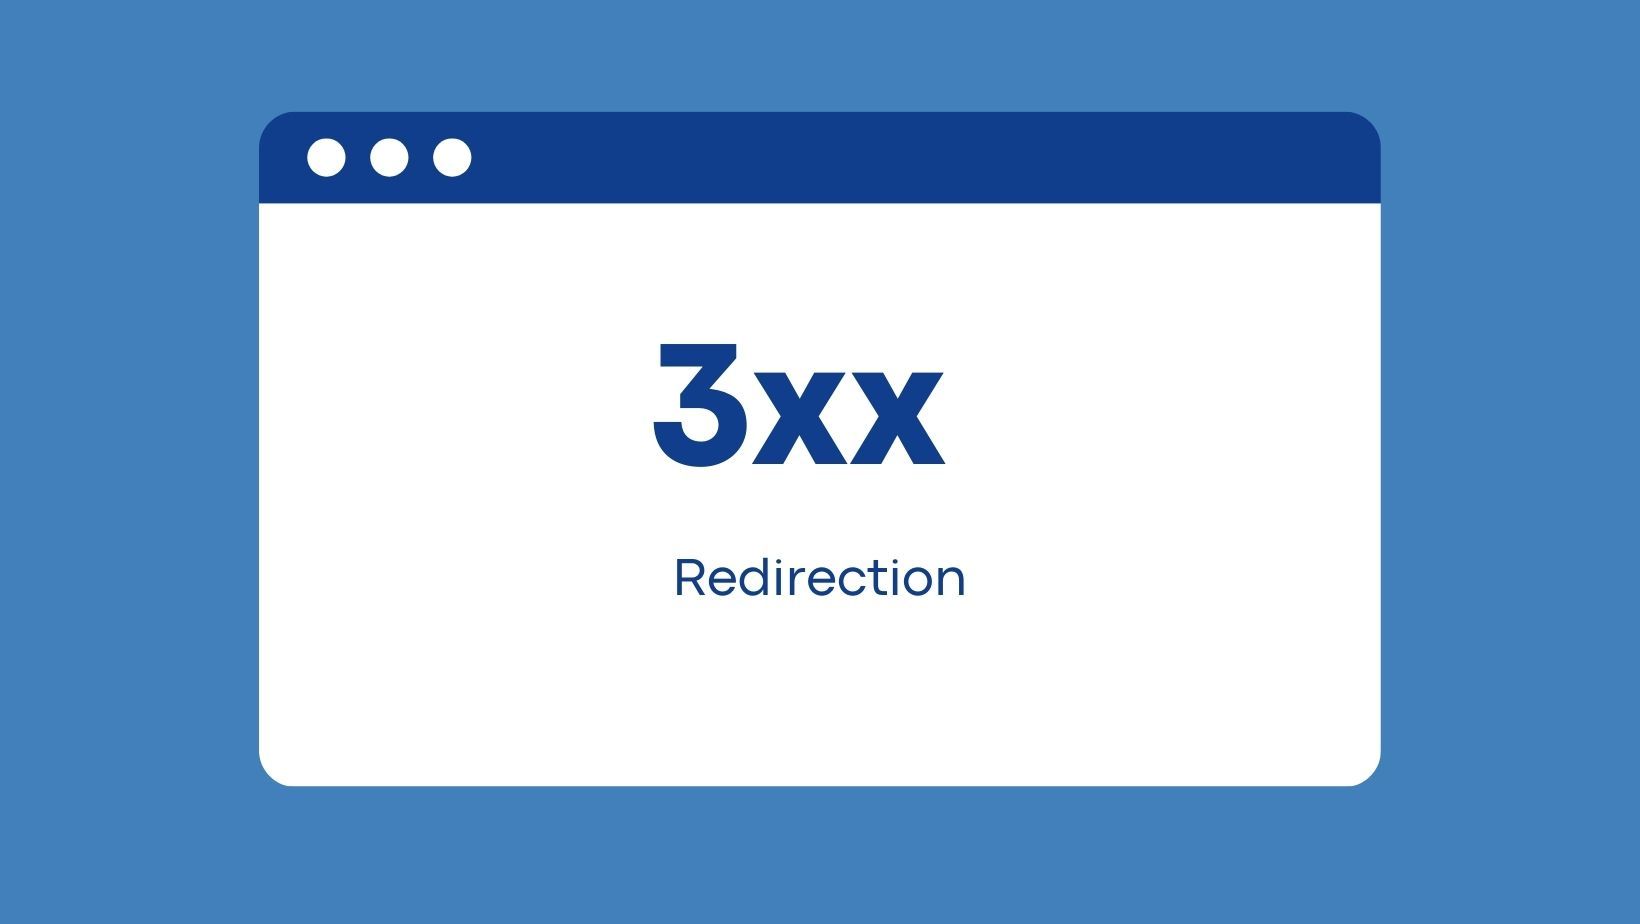 redirection status on the browser with blue theme